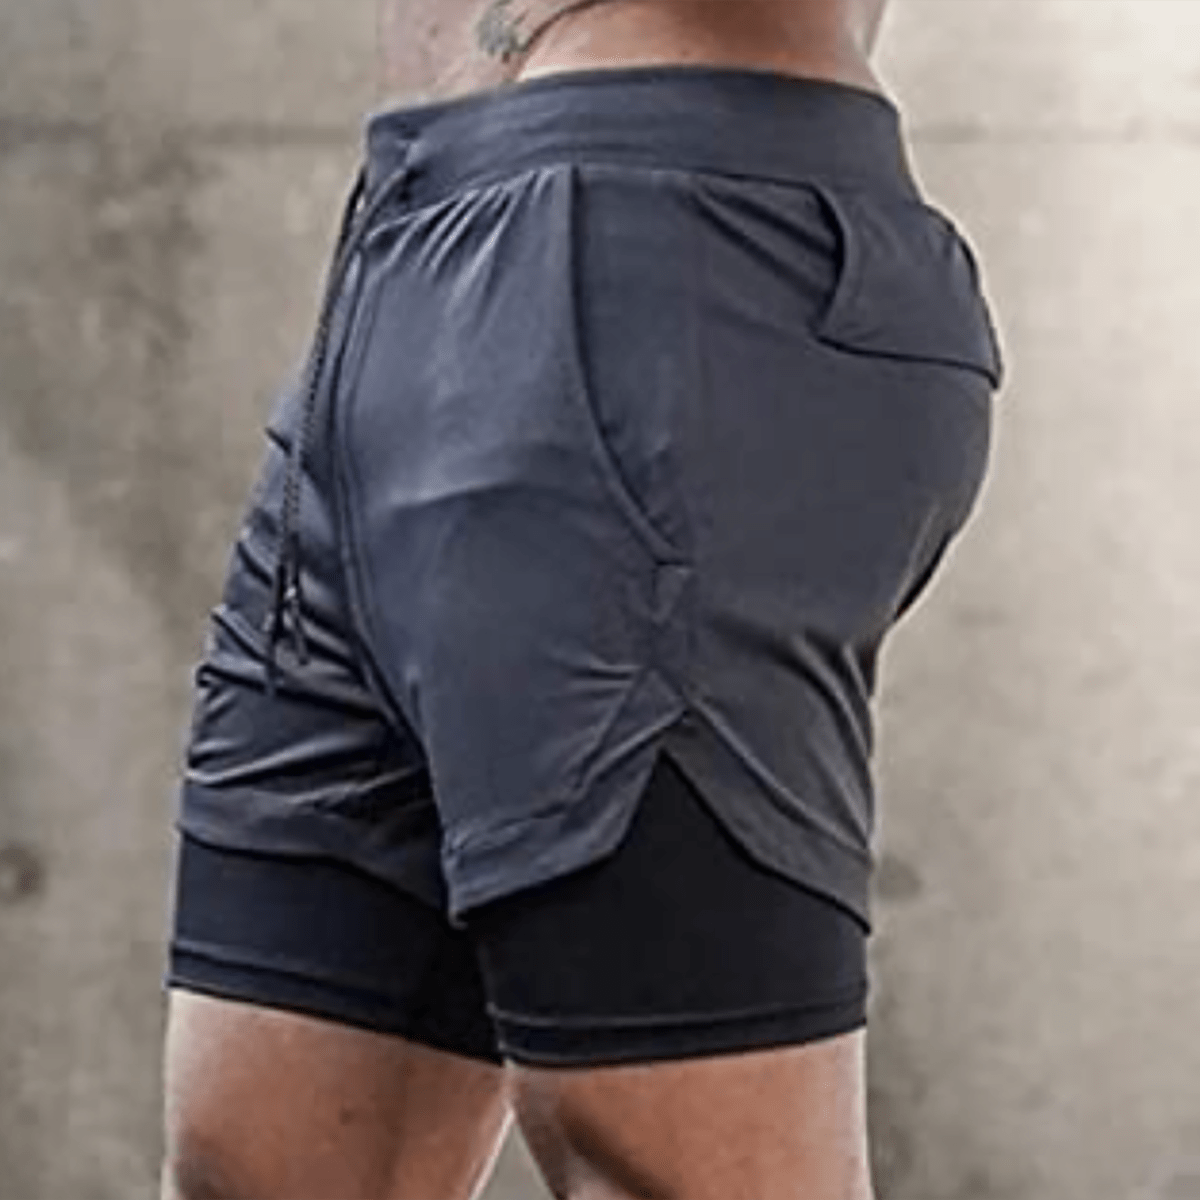 These Bestselling Running Shorts Have Both a Phone and Towel